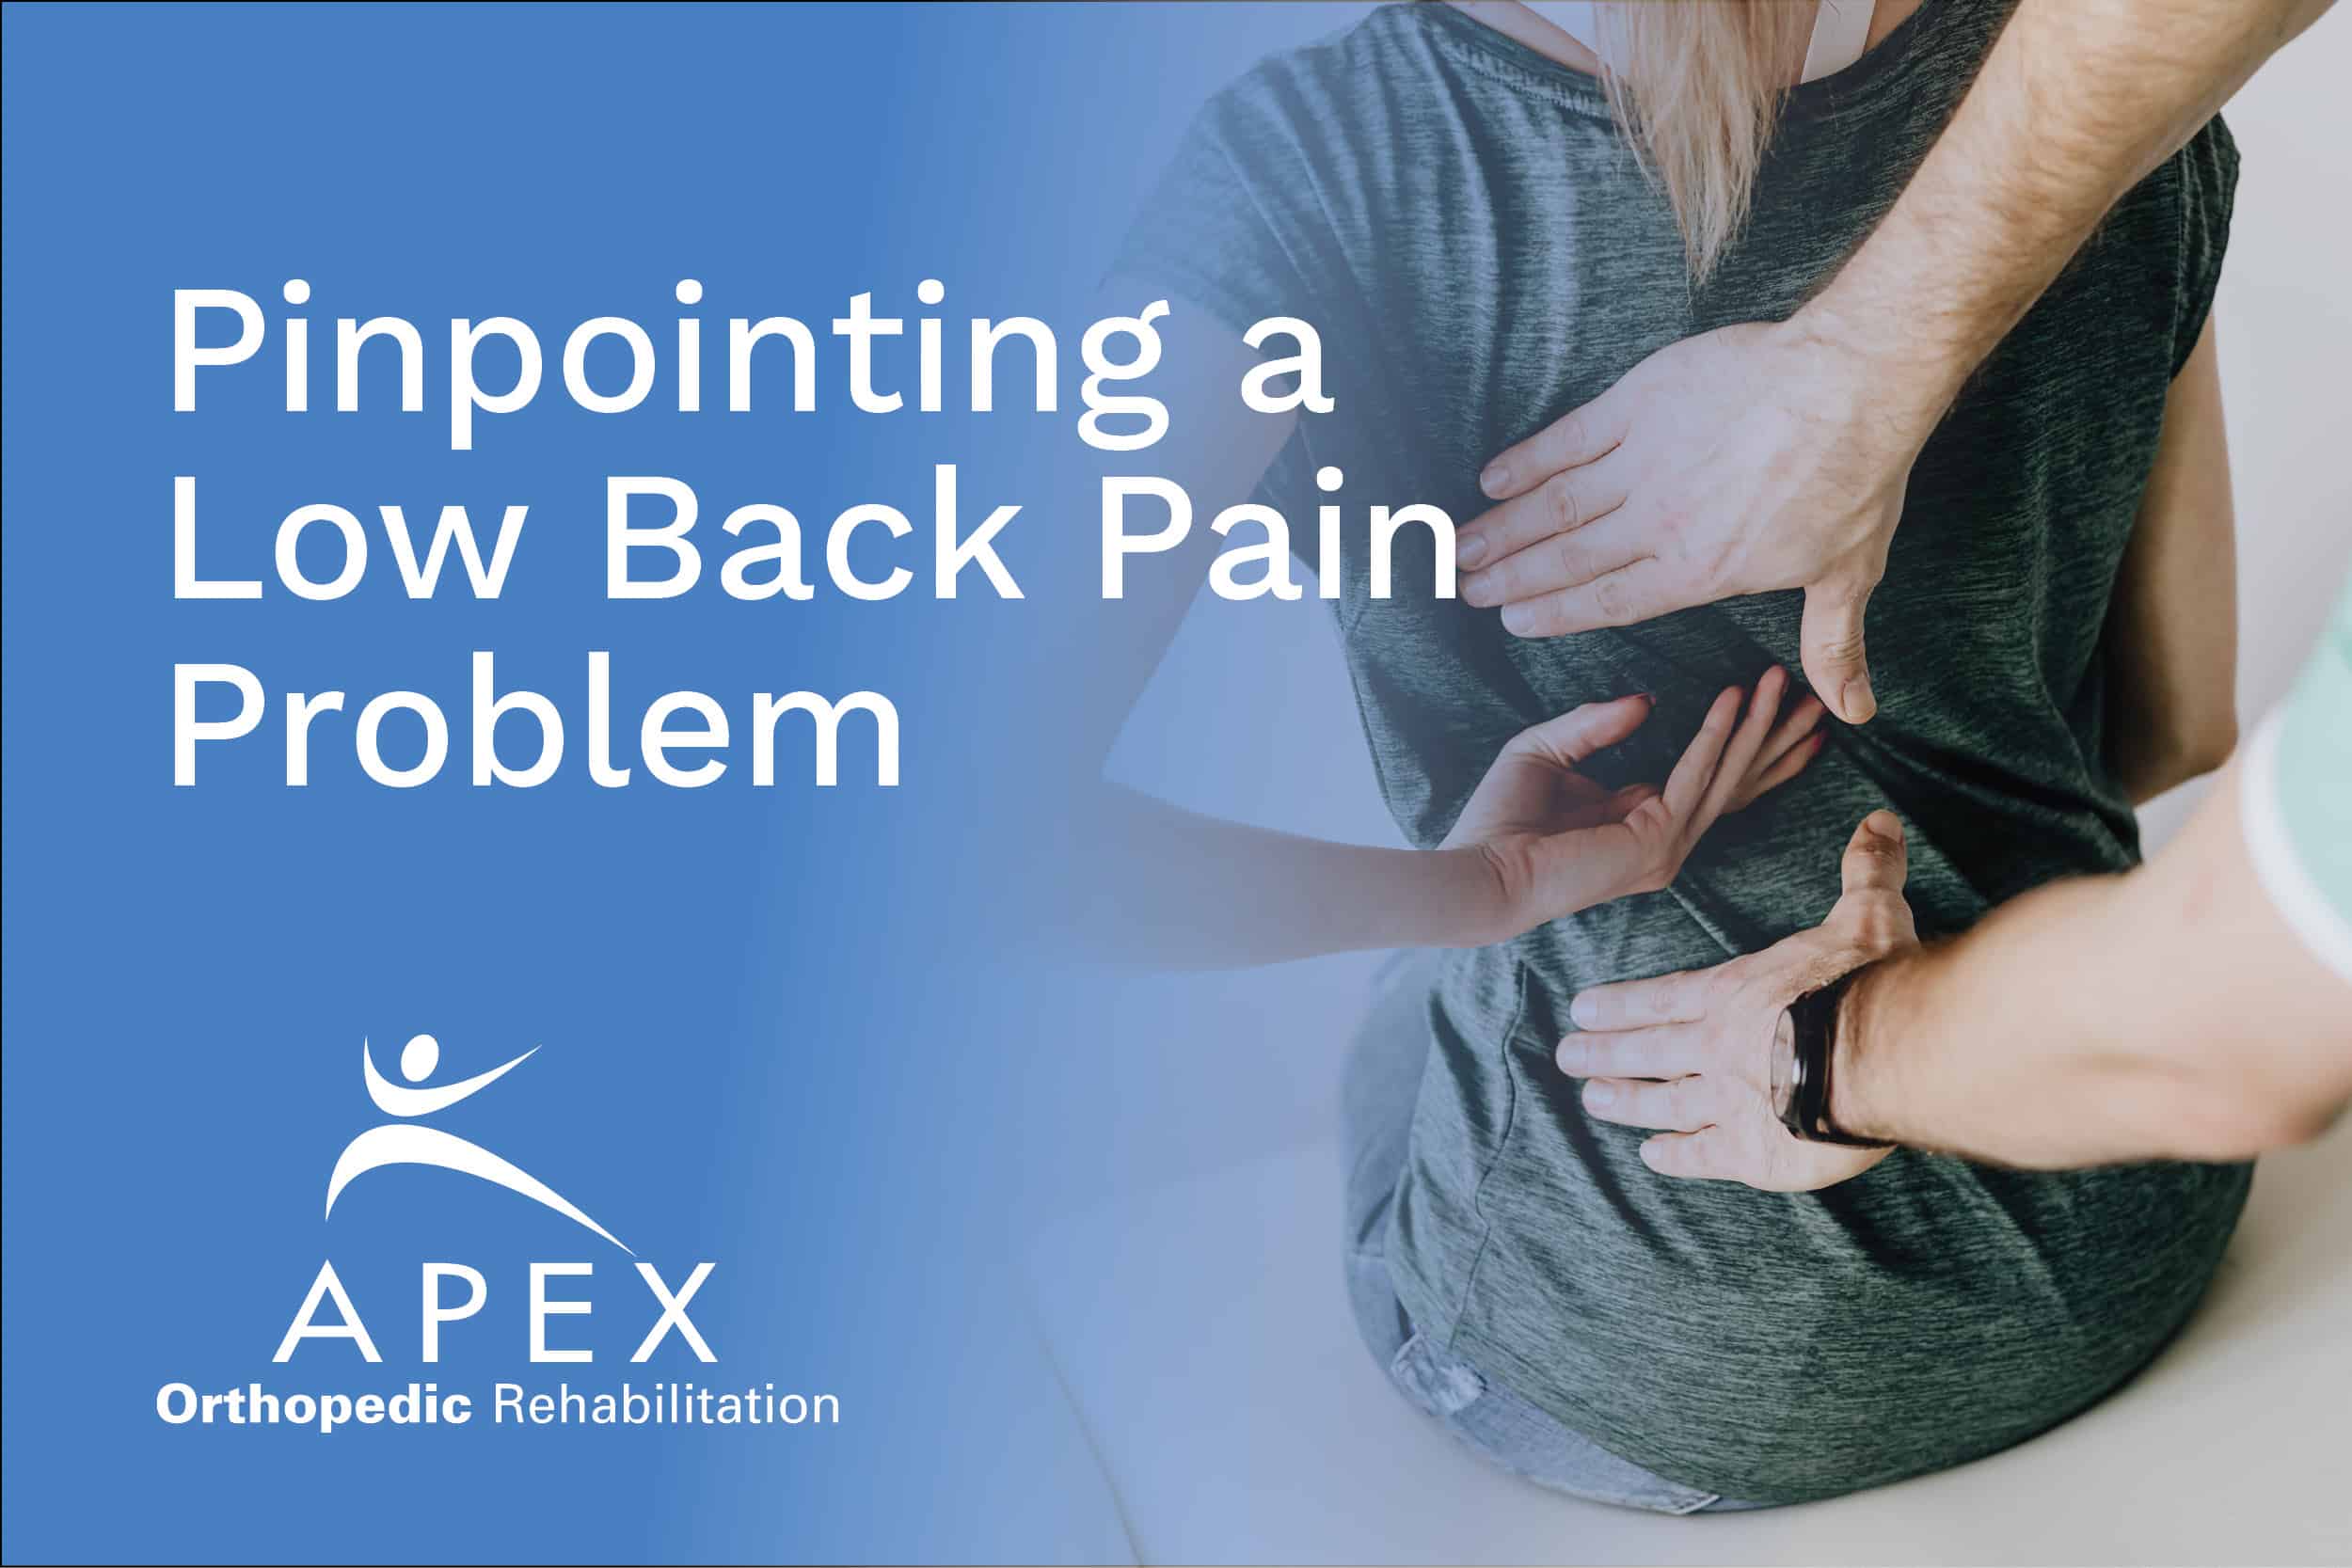 Pinpointing a Low Back Pain Problem